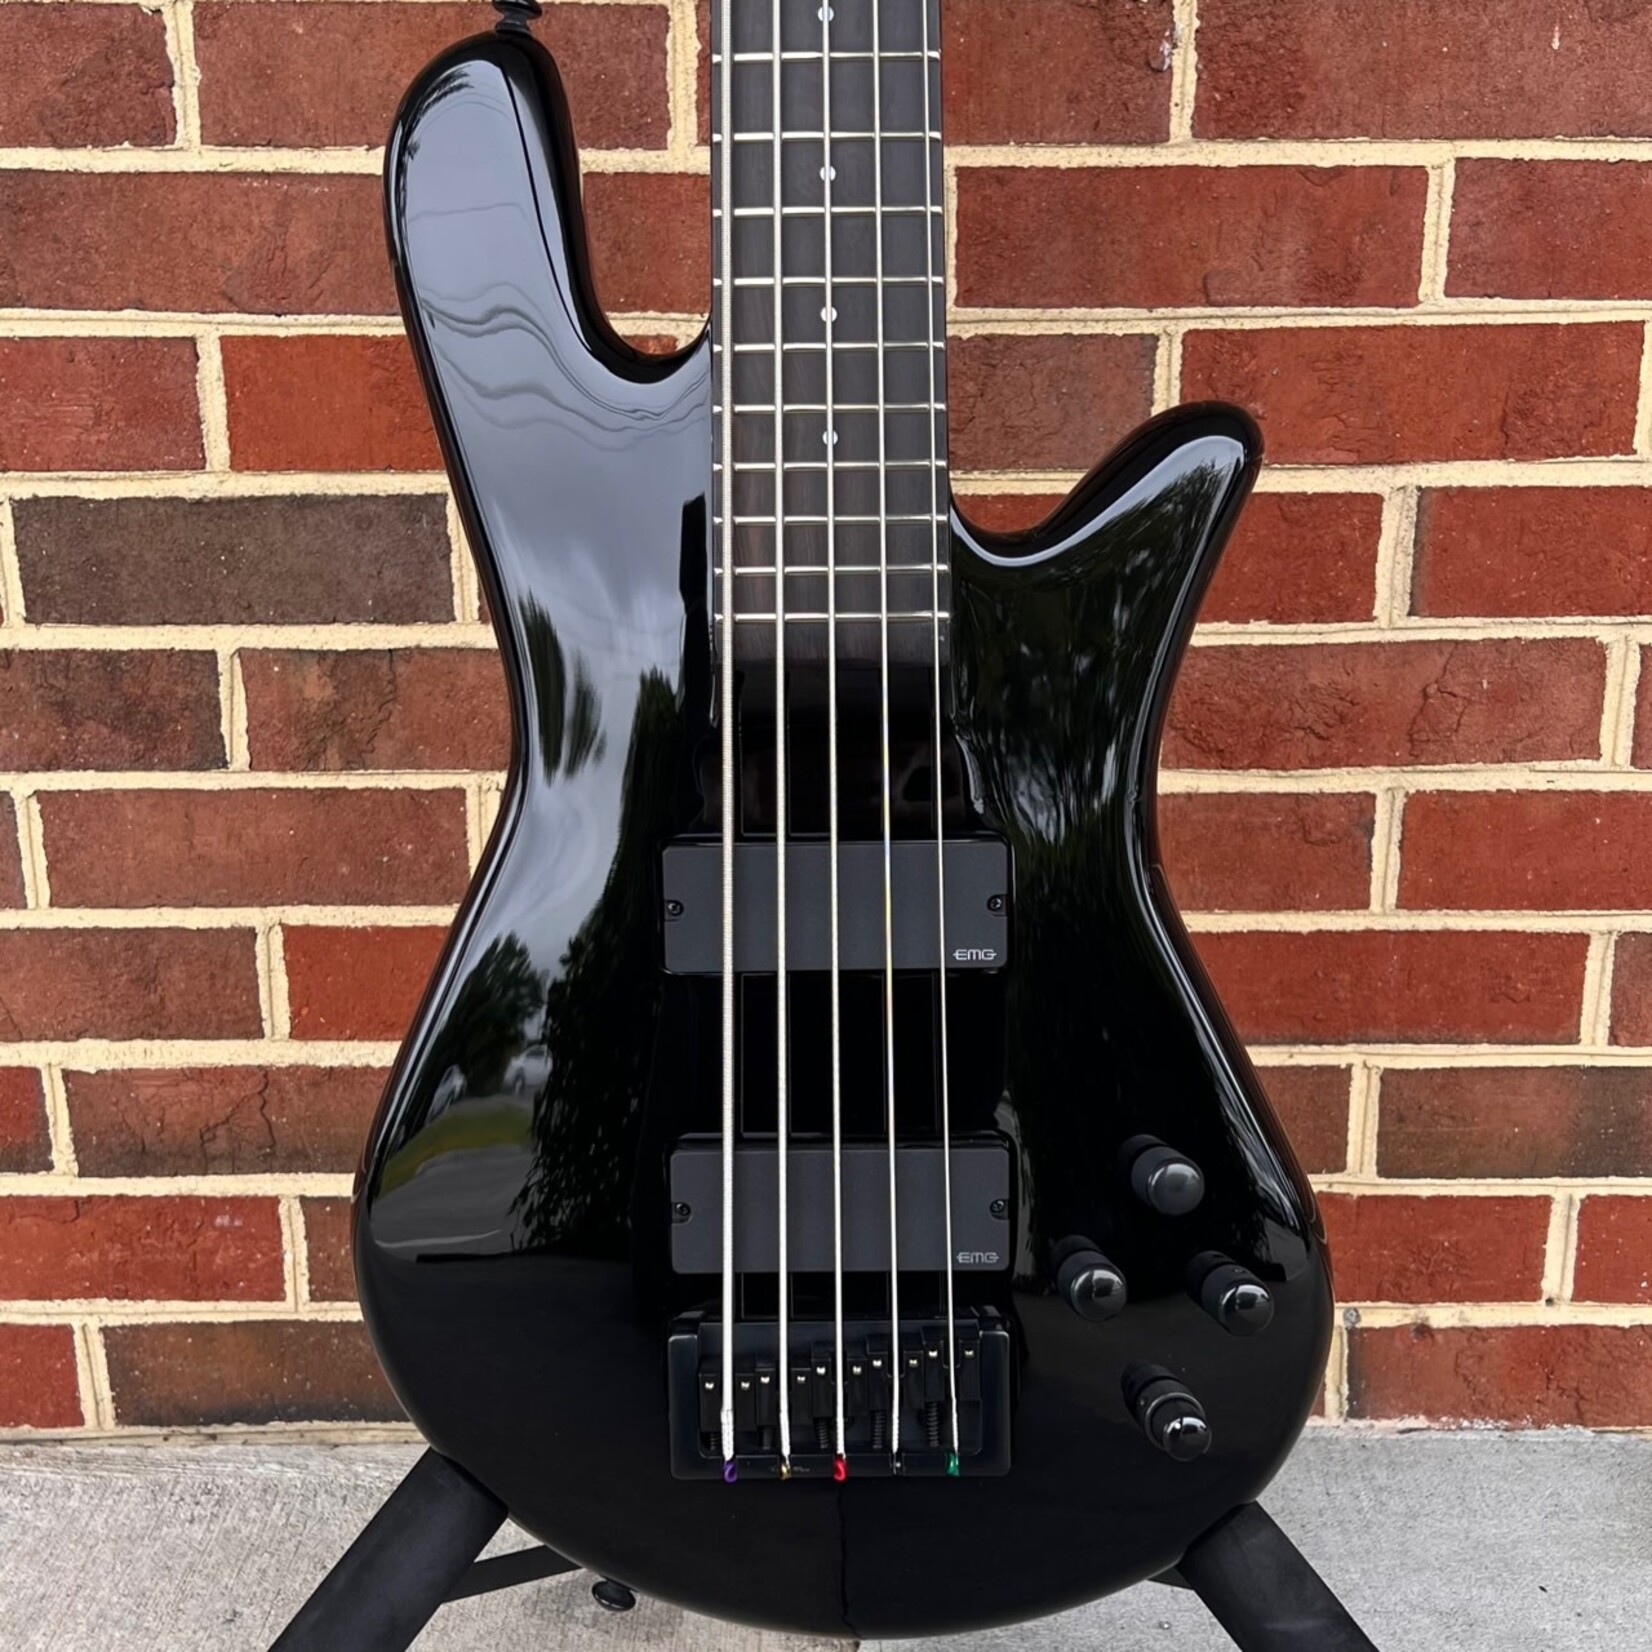 Spector Spector NS Ethos HP 5-String, Solid Black Gloss, EMG 40DC Pickups, Darkglass Tone Capsule, Gig Bag, SN# W231147